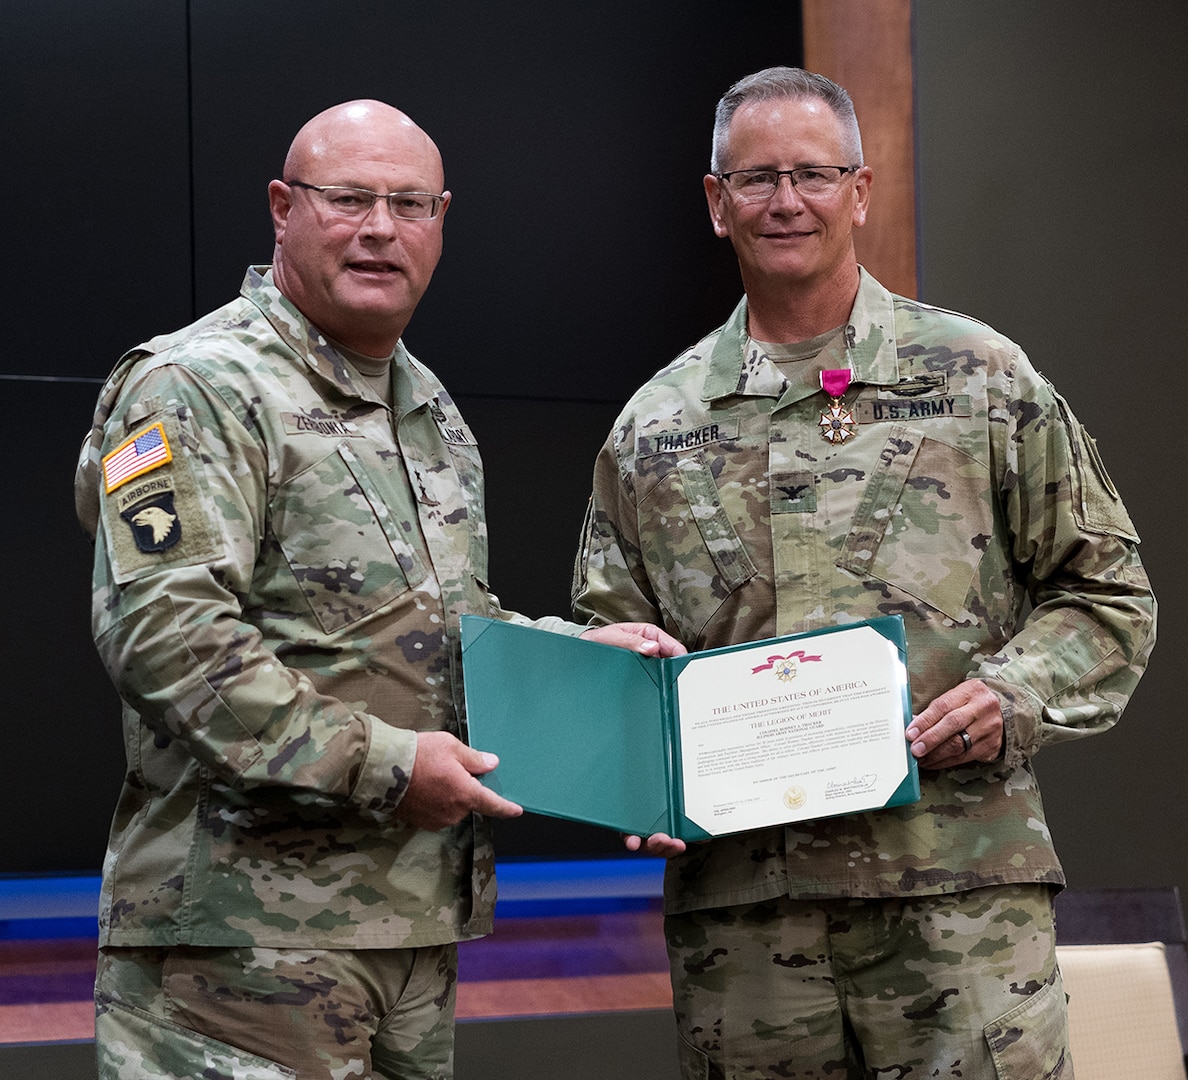 Maj. Gen. Michael R. Zerbonia, Assistant Adjutant General-Army, Illinois National Guard, presents Col. Rodney Thacker with the Legion of Merit.